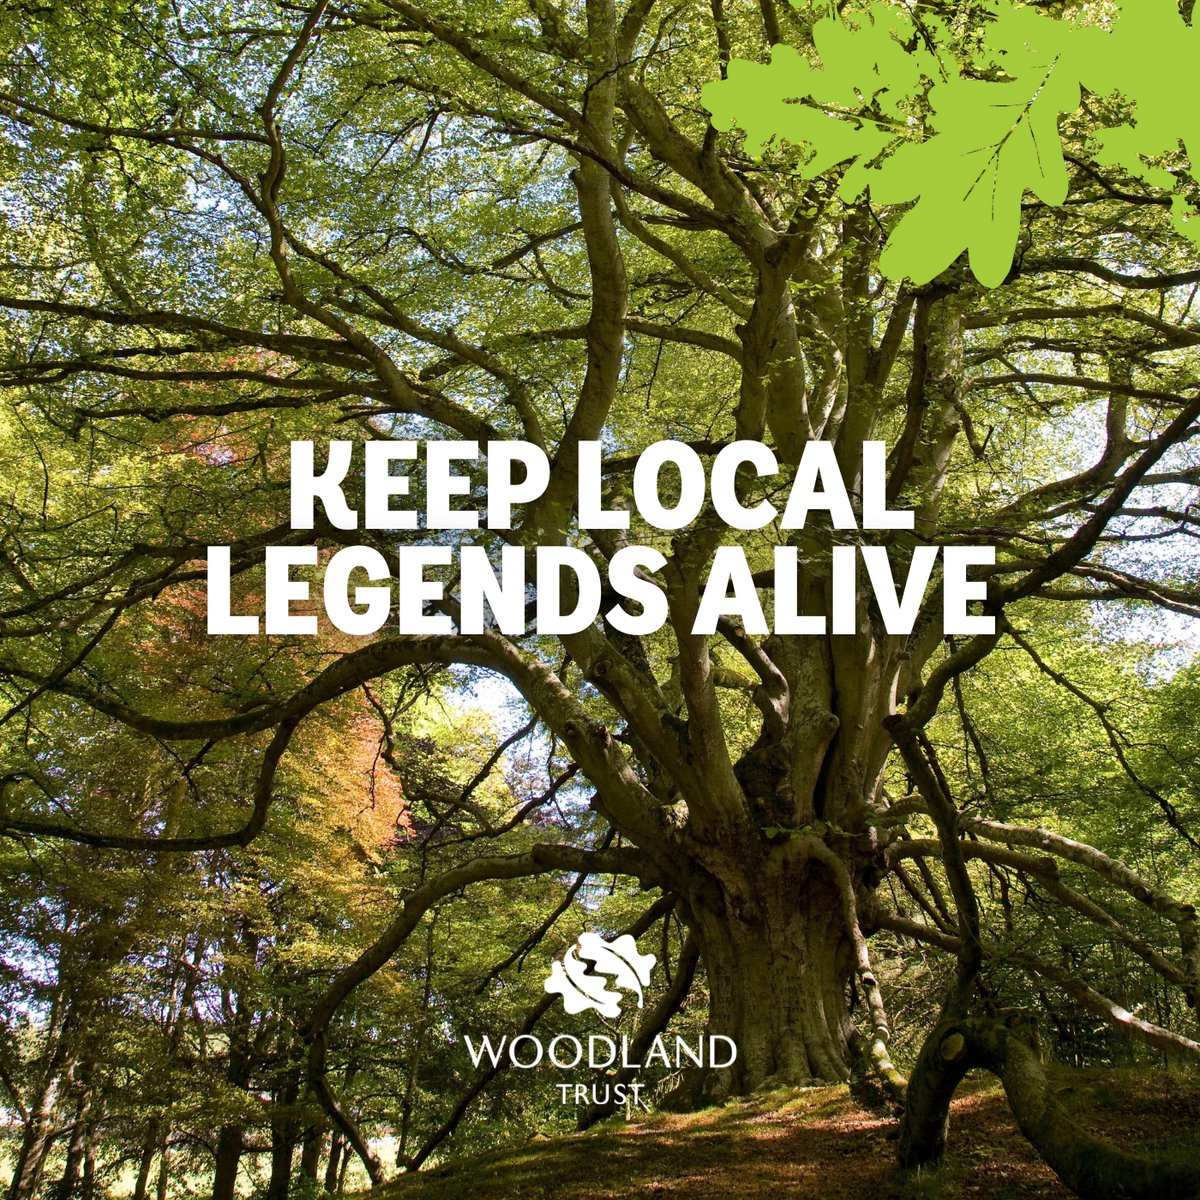 🌳 #AncientTrees have no automatic right of protection in the UK. We're working to change that. 👉 Add your voice to our campaign and help us protect our #LivingLegends: bit.ly/3Ov9uSR